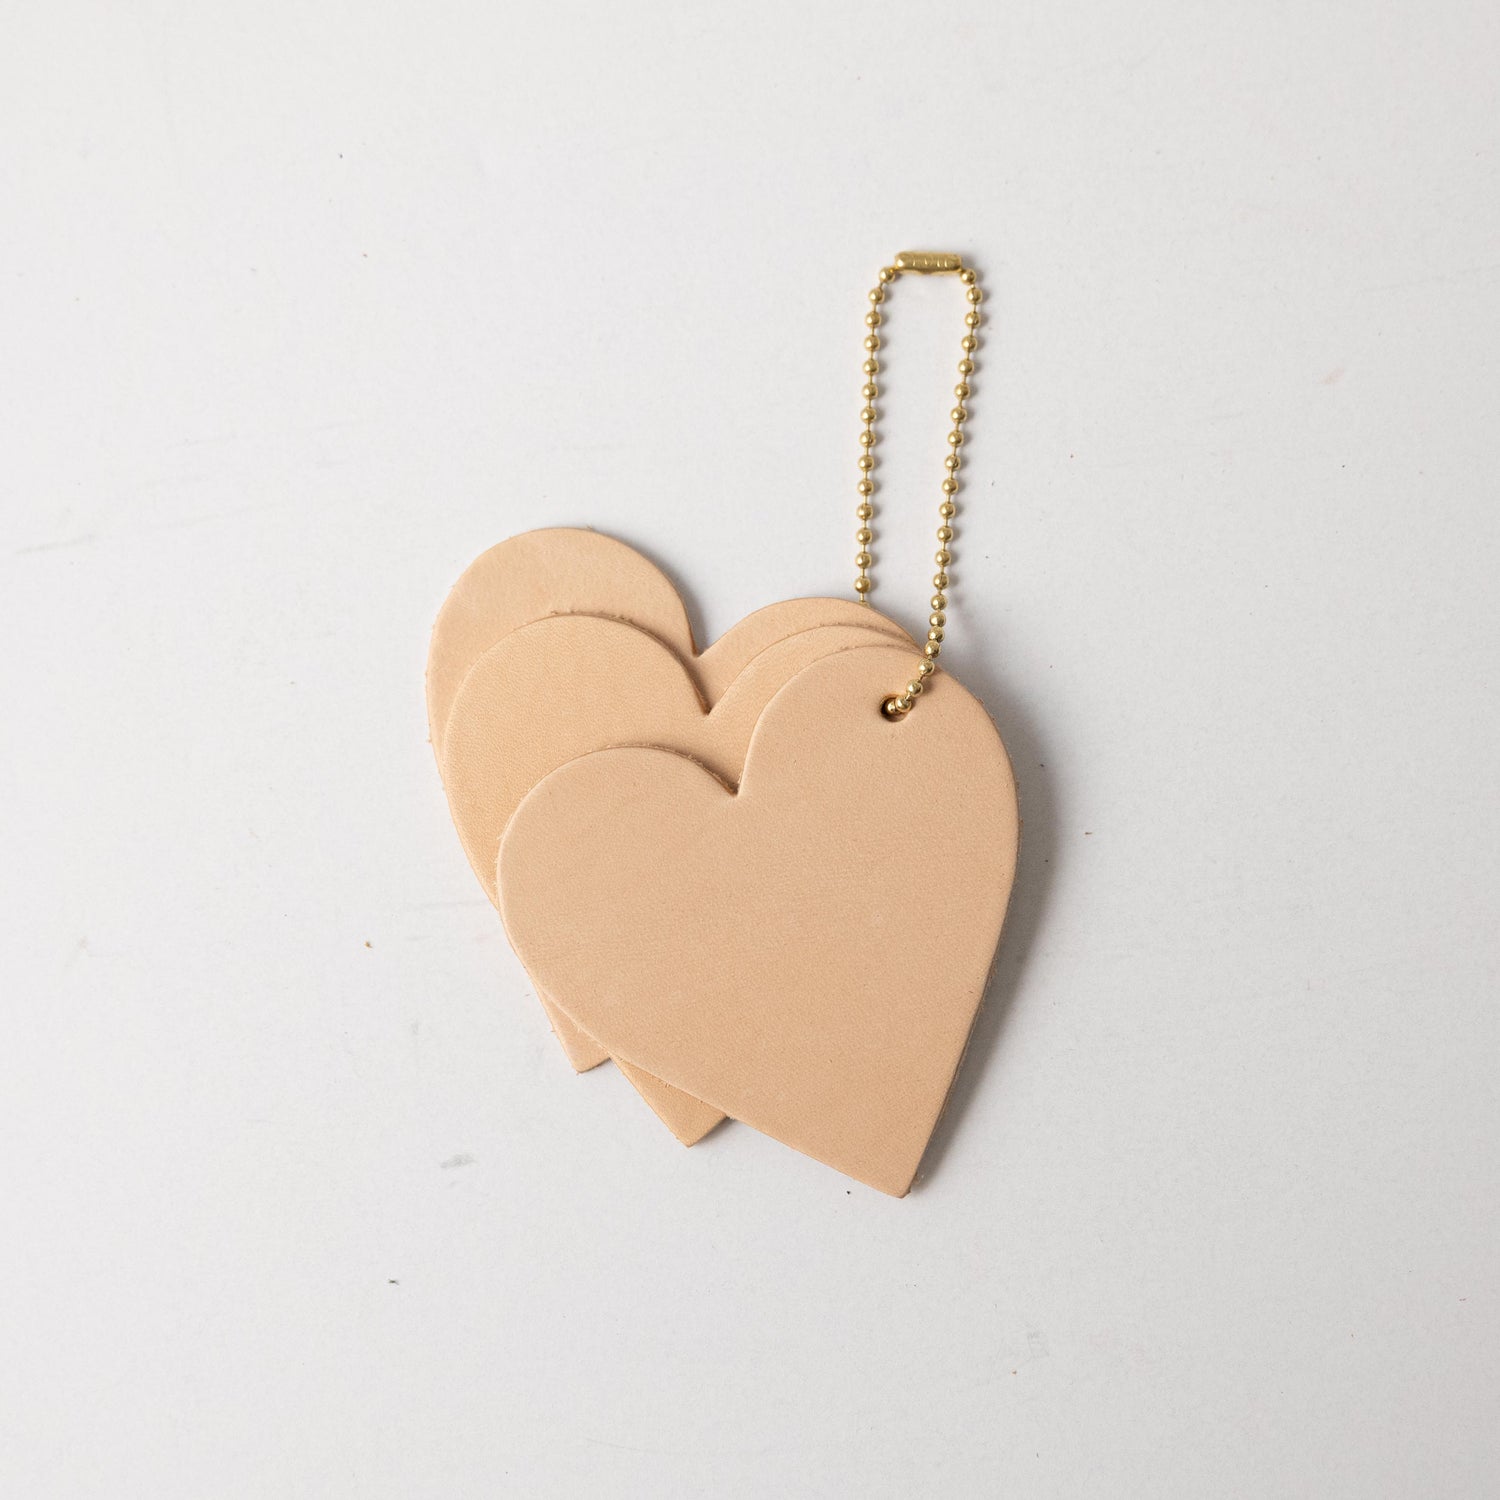 Vegetable Tanned Heart Charms